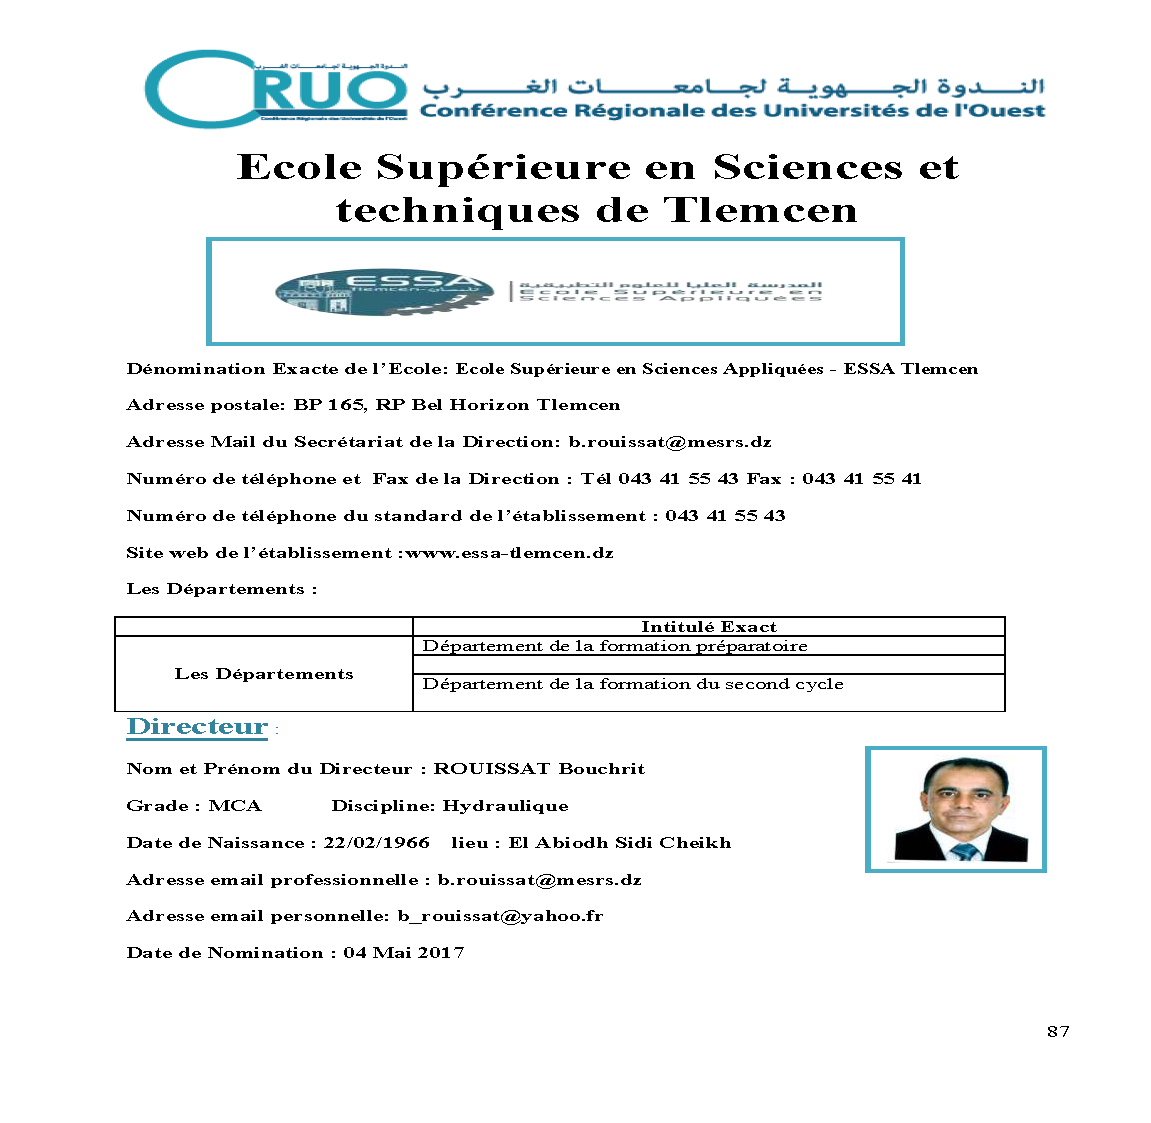 Annuaire_responsables_CRUO_Mai_2020_Page_88